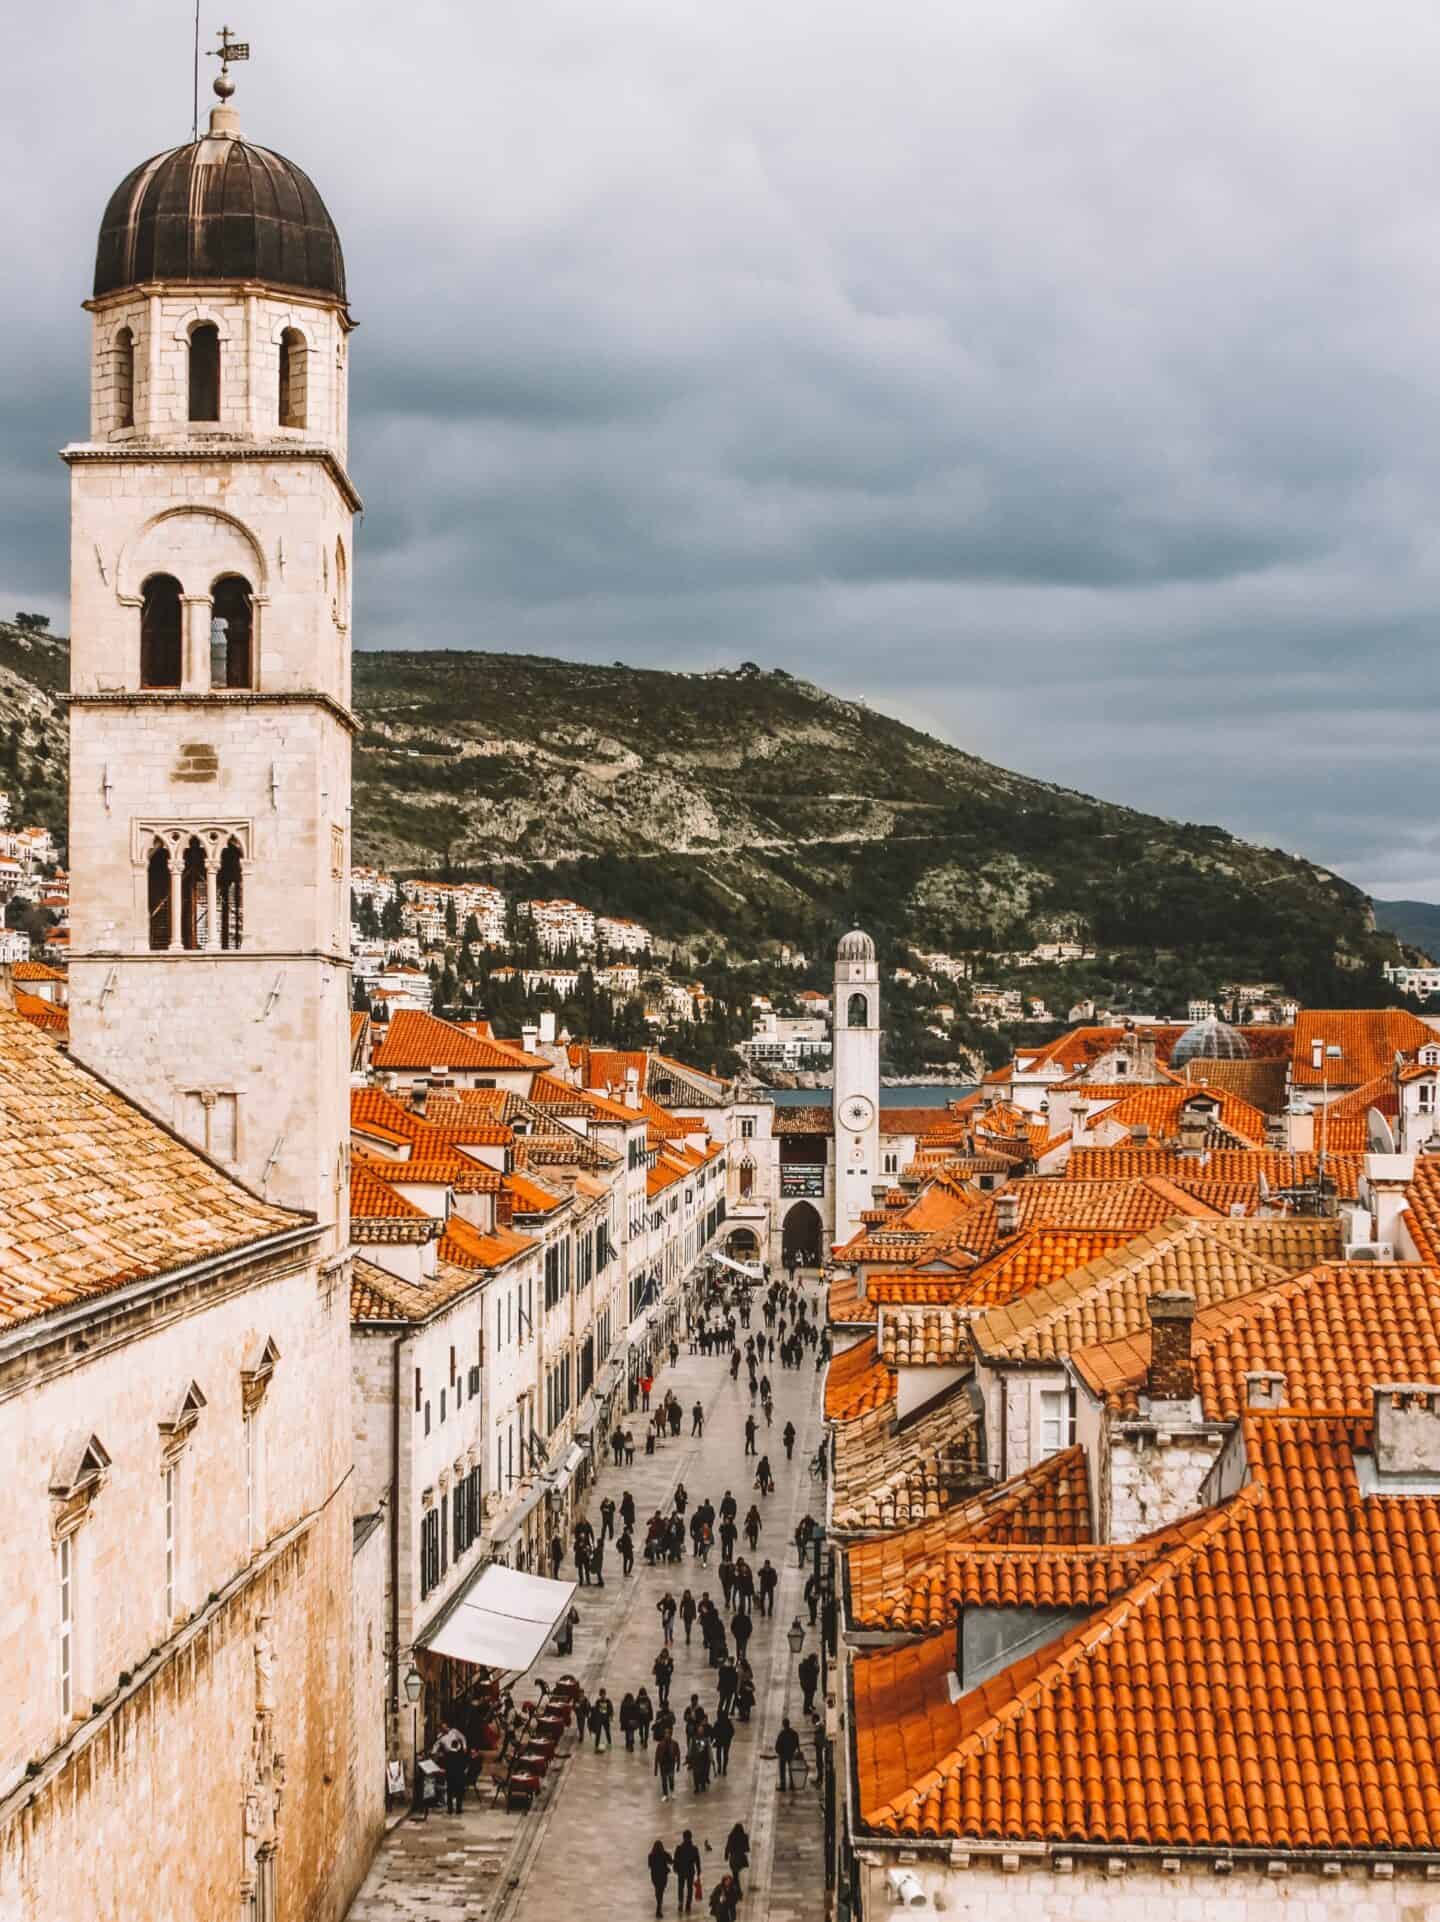 Views of the Stradun from the city walls in Dubrovnik